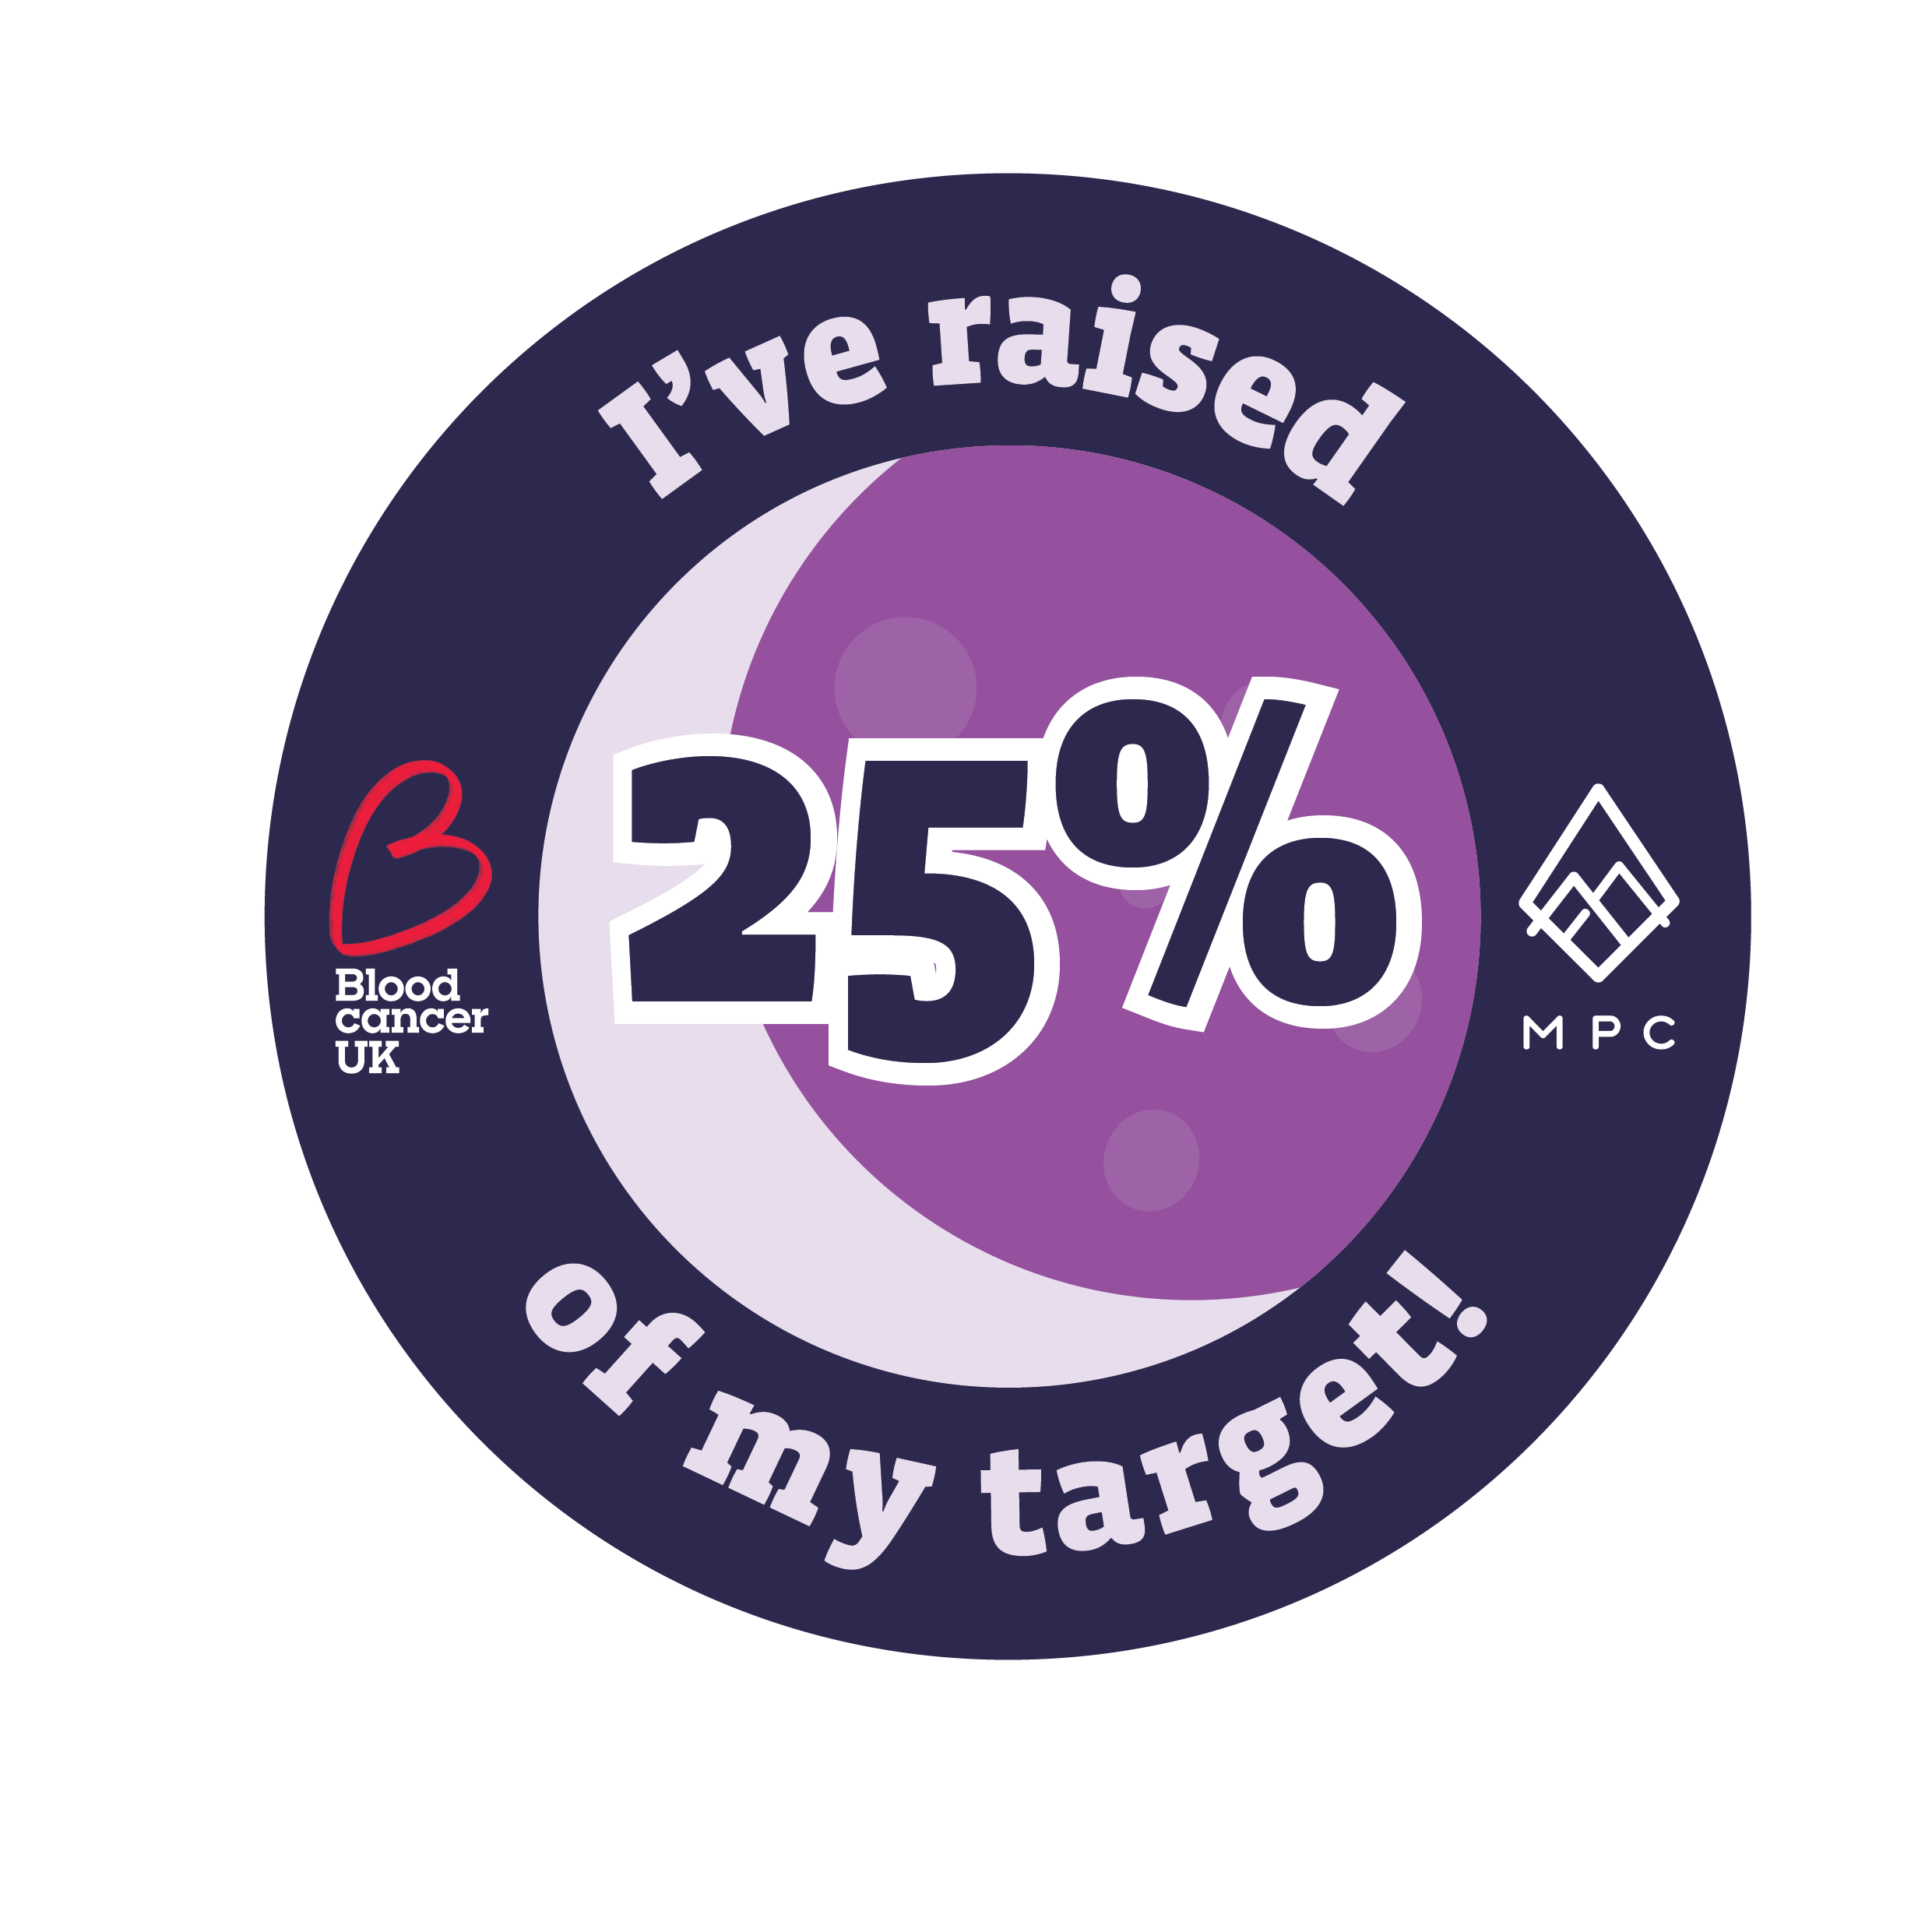 Raise 25% of your target